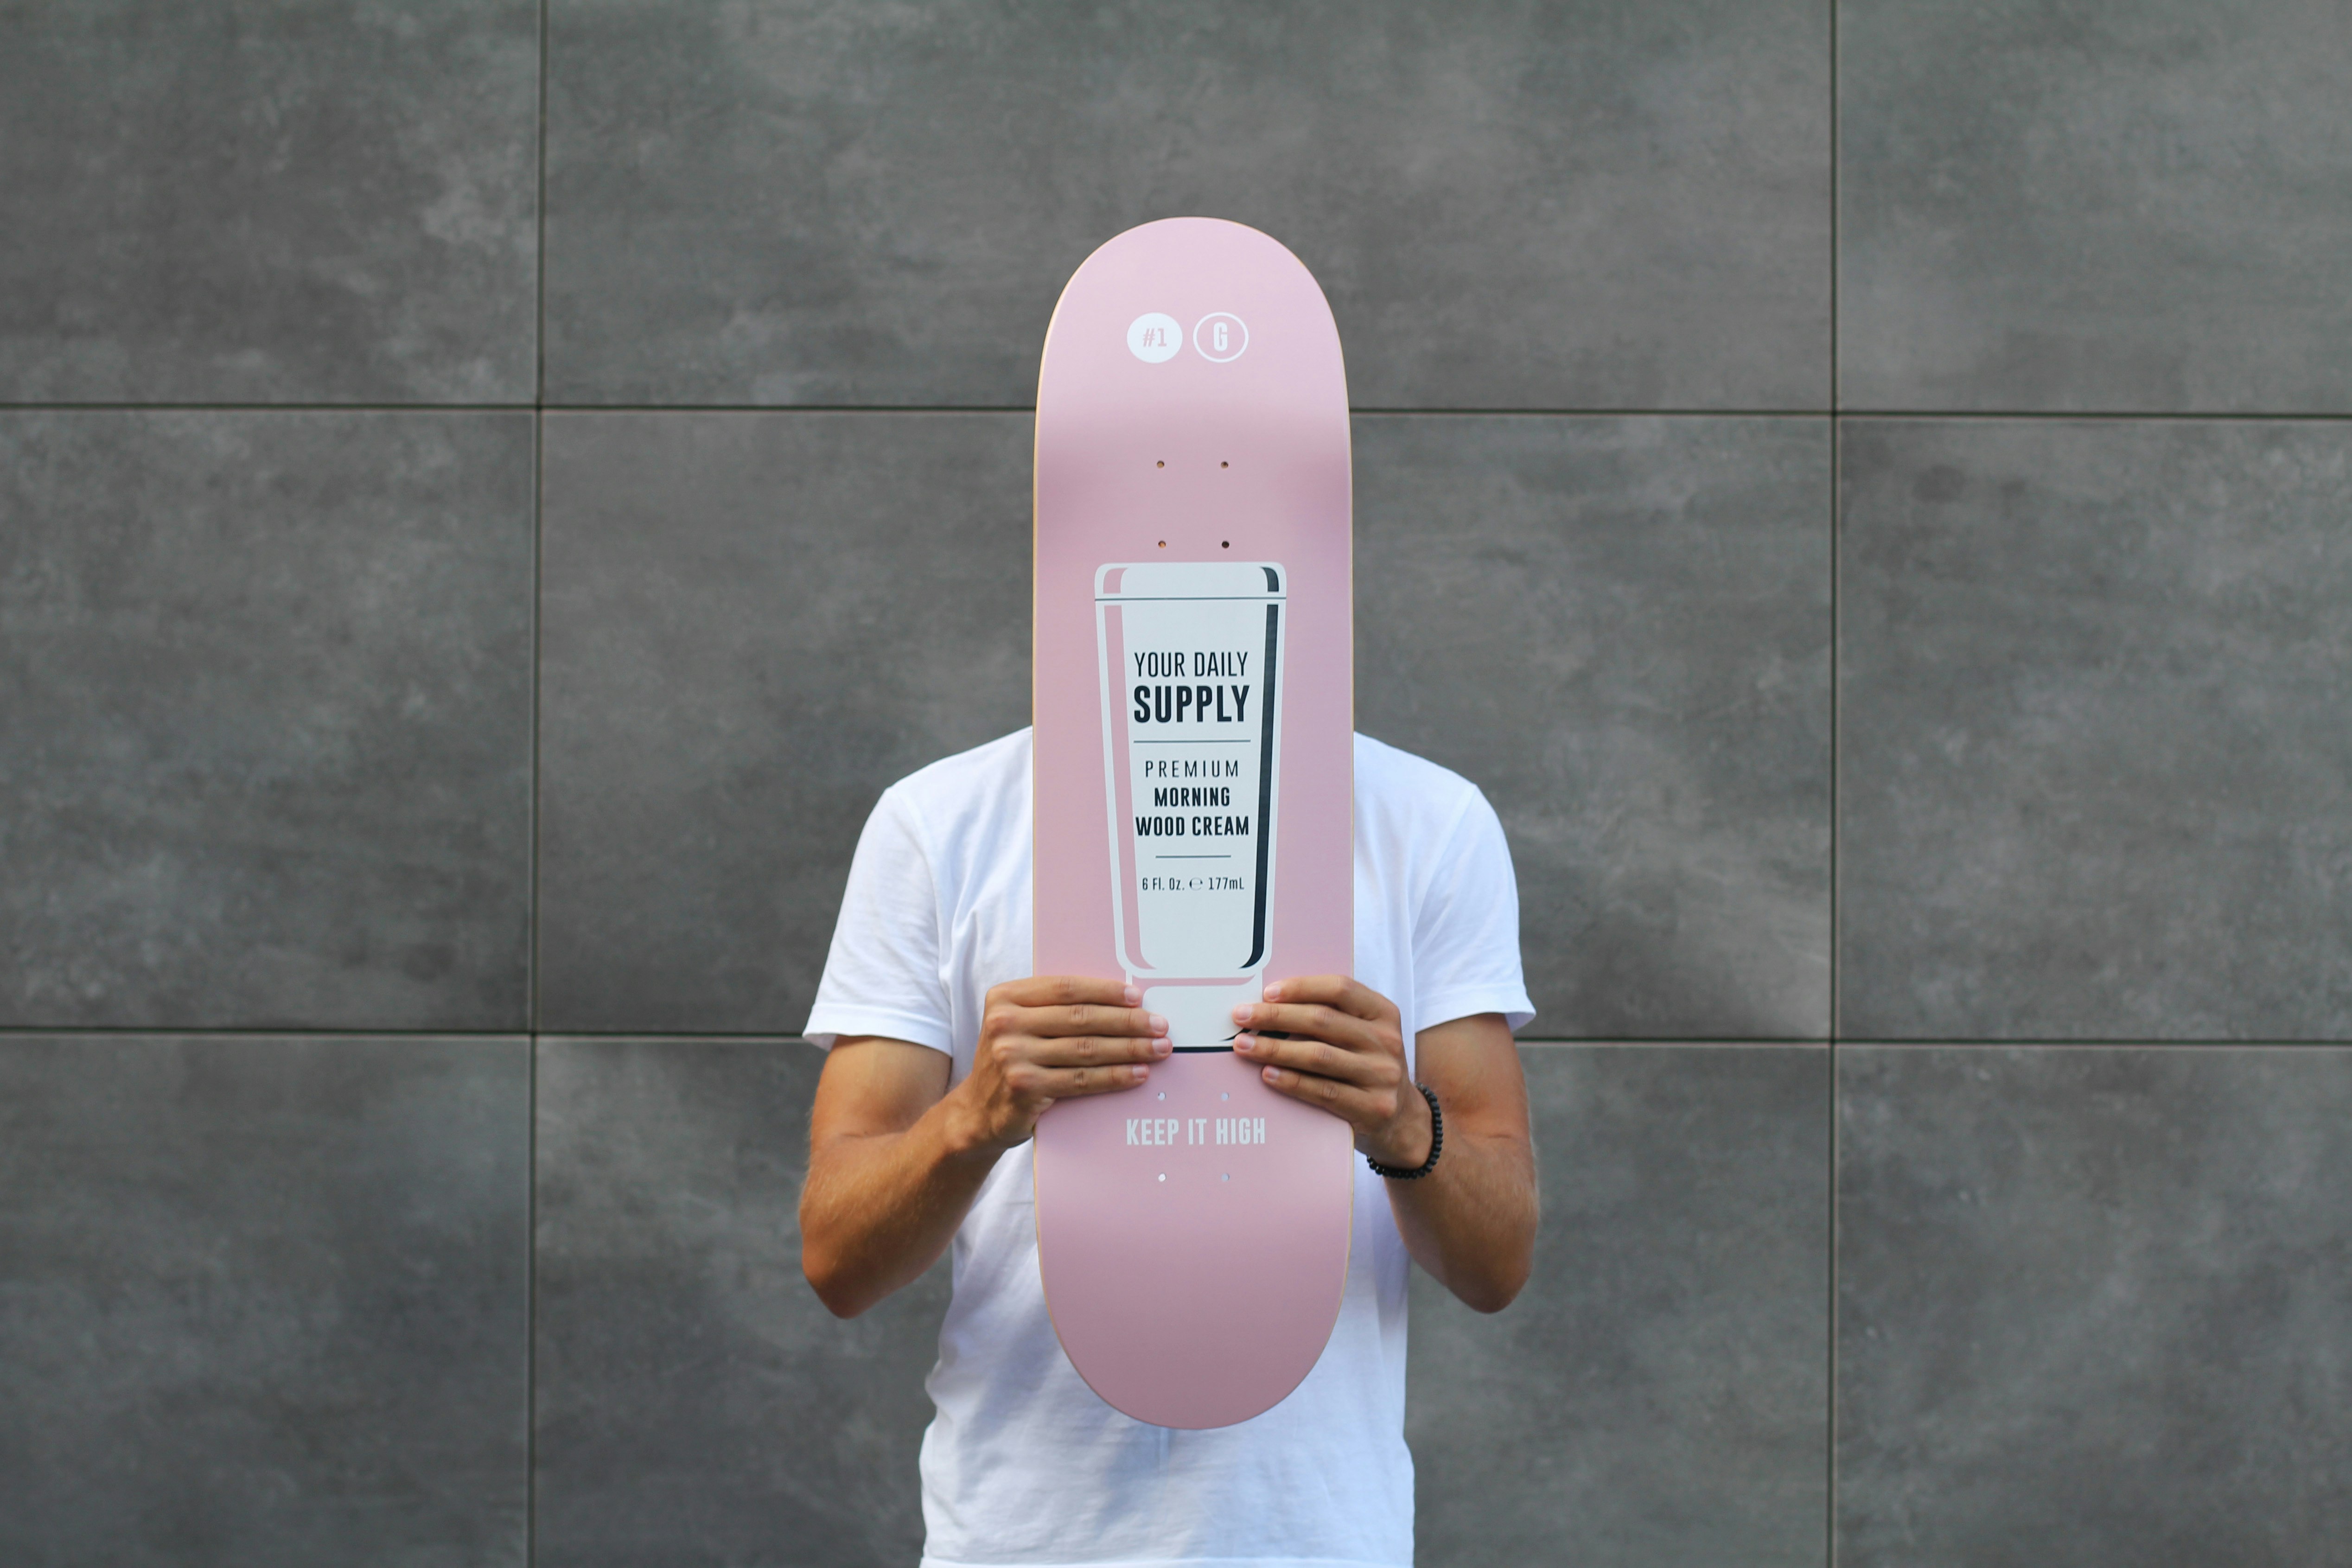 It’s an annual special skateboard deck produced for a local skateboarding community in Lviv. It’s always satisfying to see your design on a physical product. We did this photo to capture the moment, as well as for a little promo campaign.